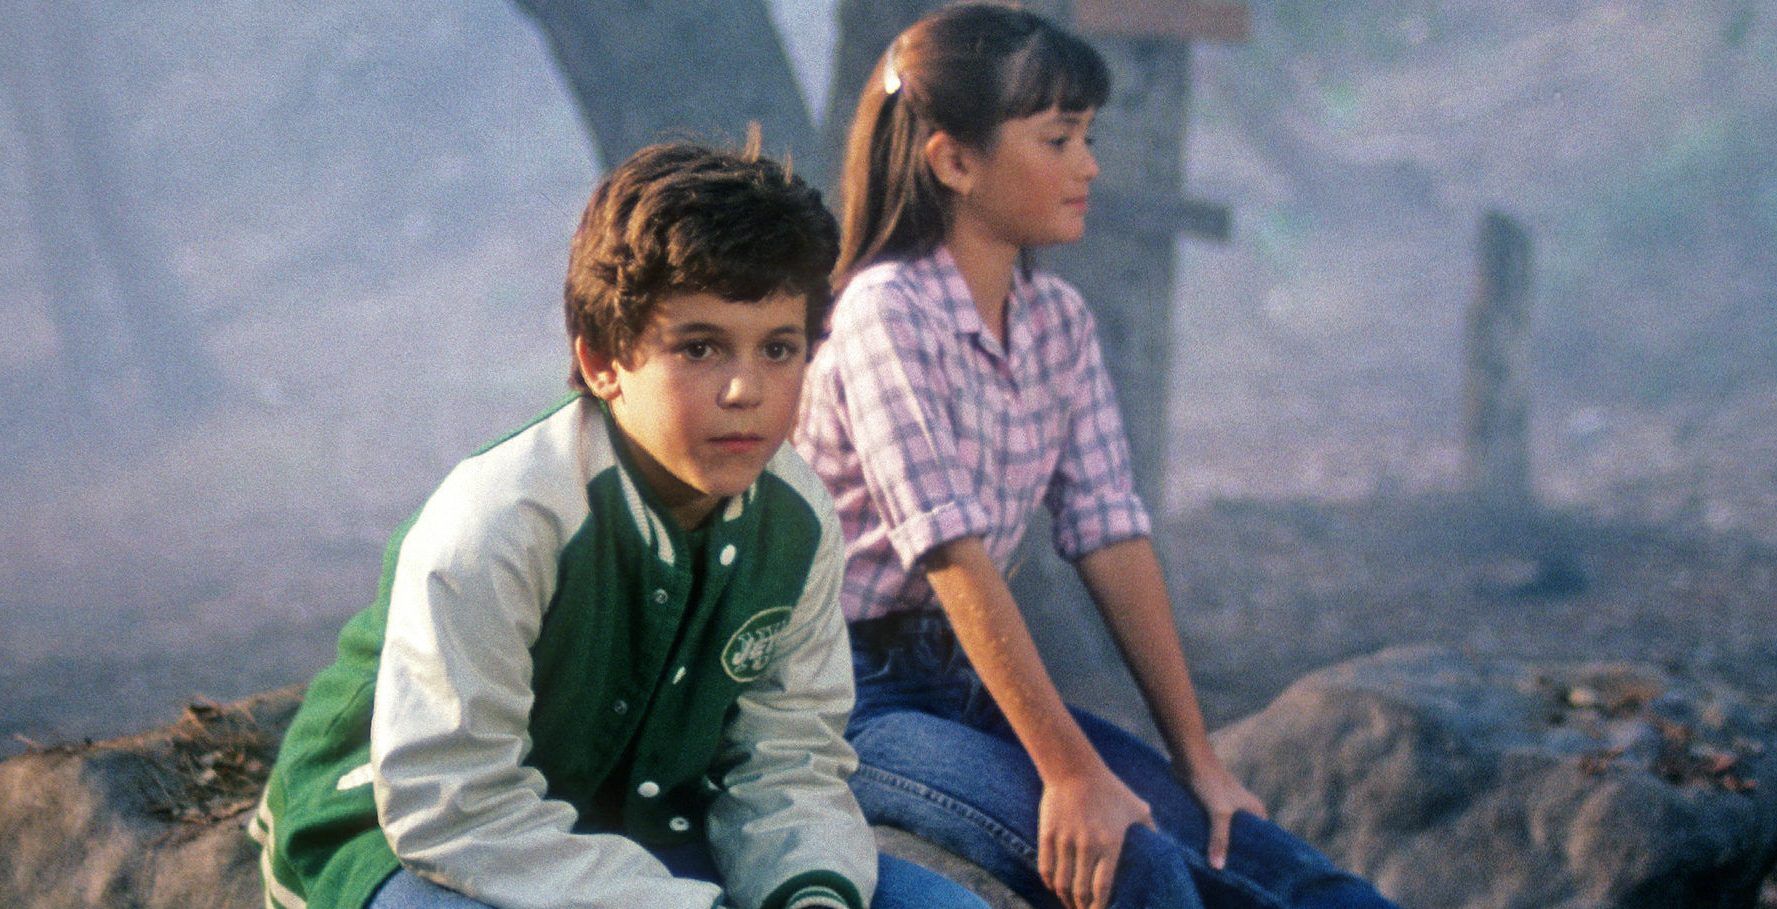 Fred Savage as Kevin Arnold and Danica McKellar as Winnie Cooper in The Wonder Years